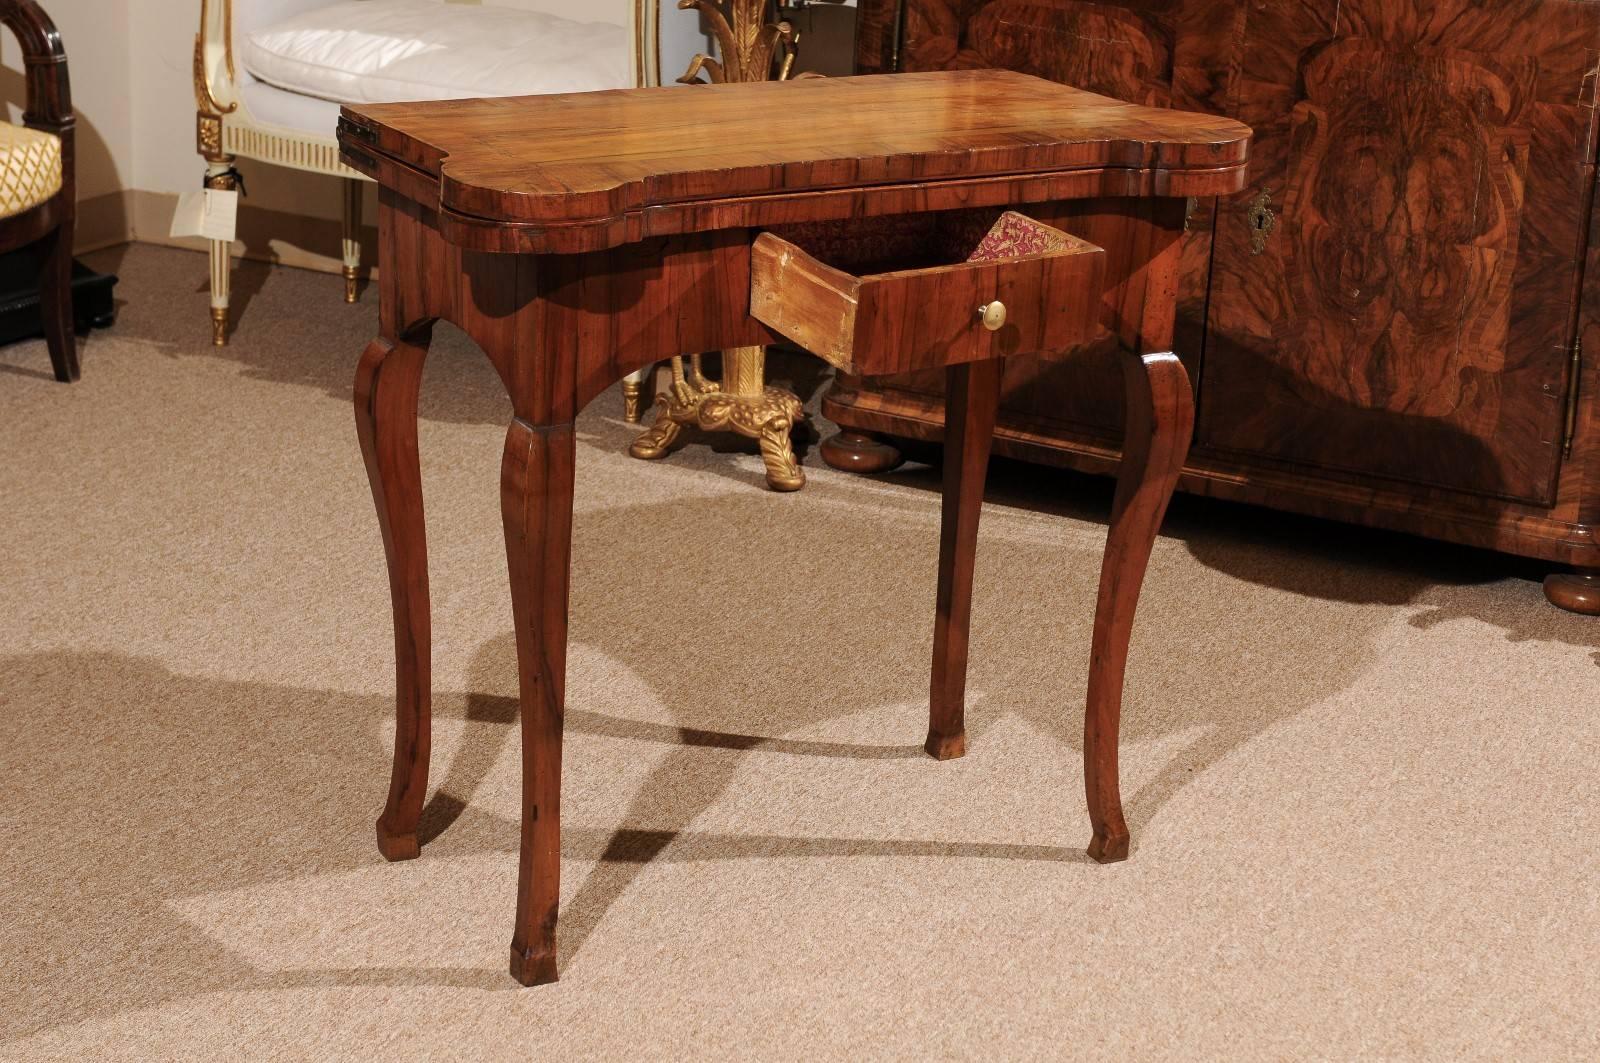 18th Century Olivewood Game Table with Drawer, Cabriole Legs and Hoof Feet 3